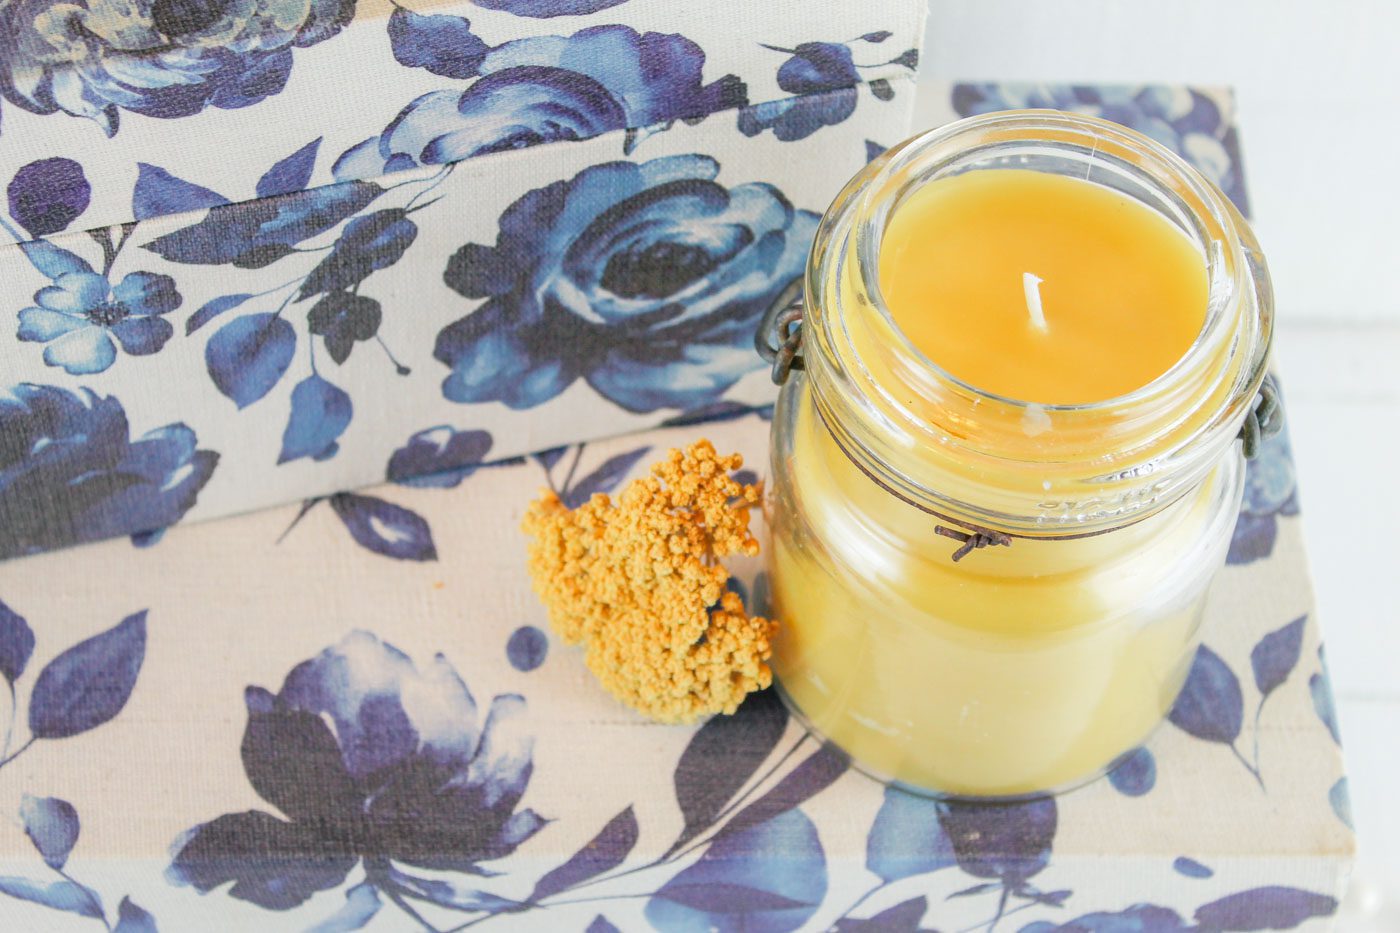 DIY Candle Recipe with Beeswax and Coconut Oil